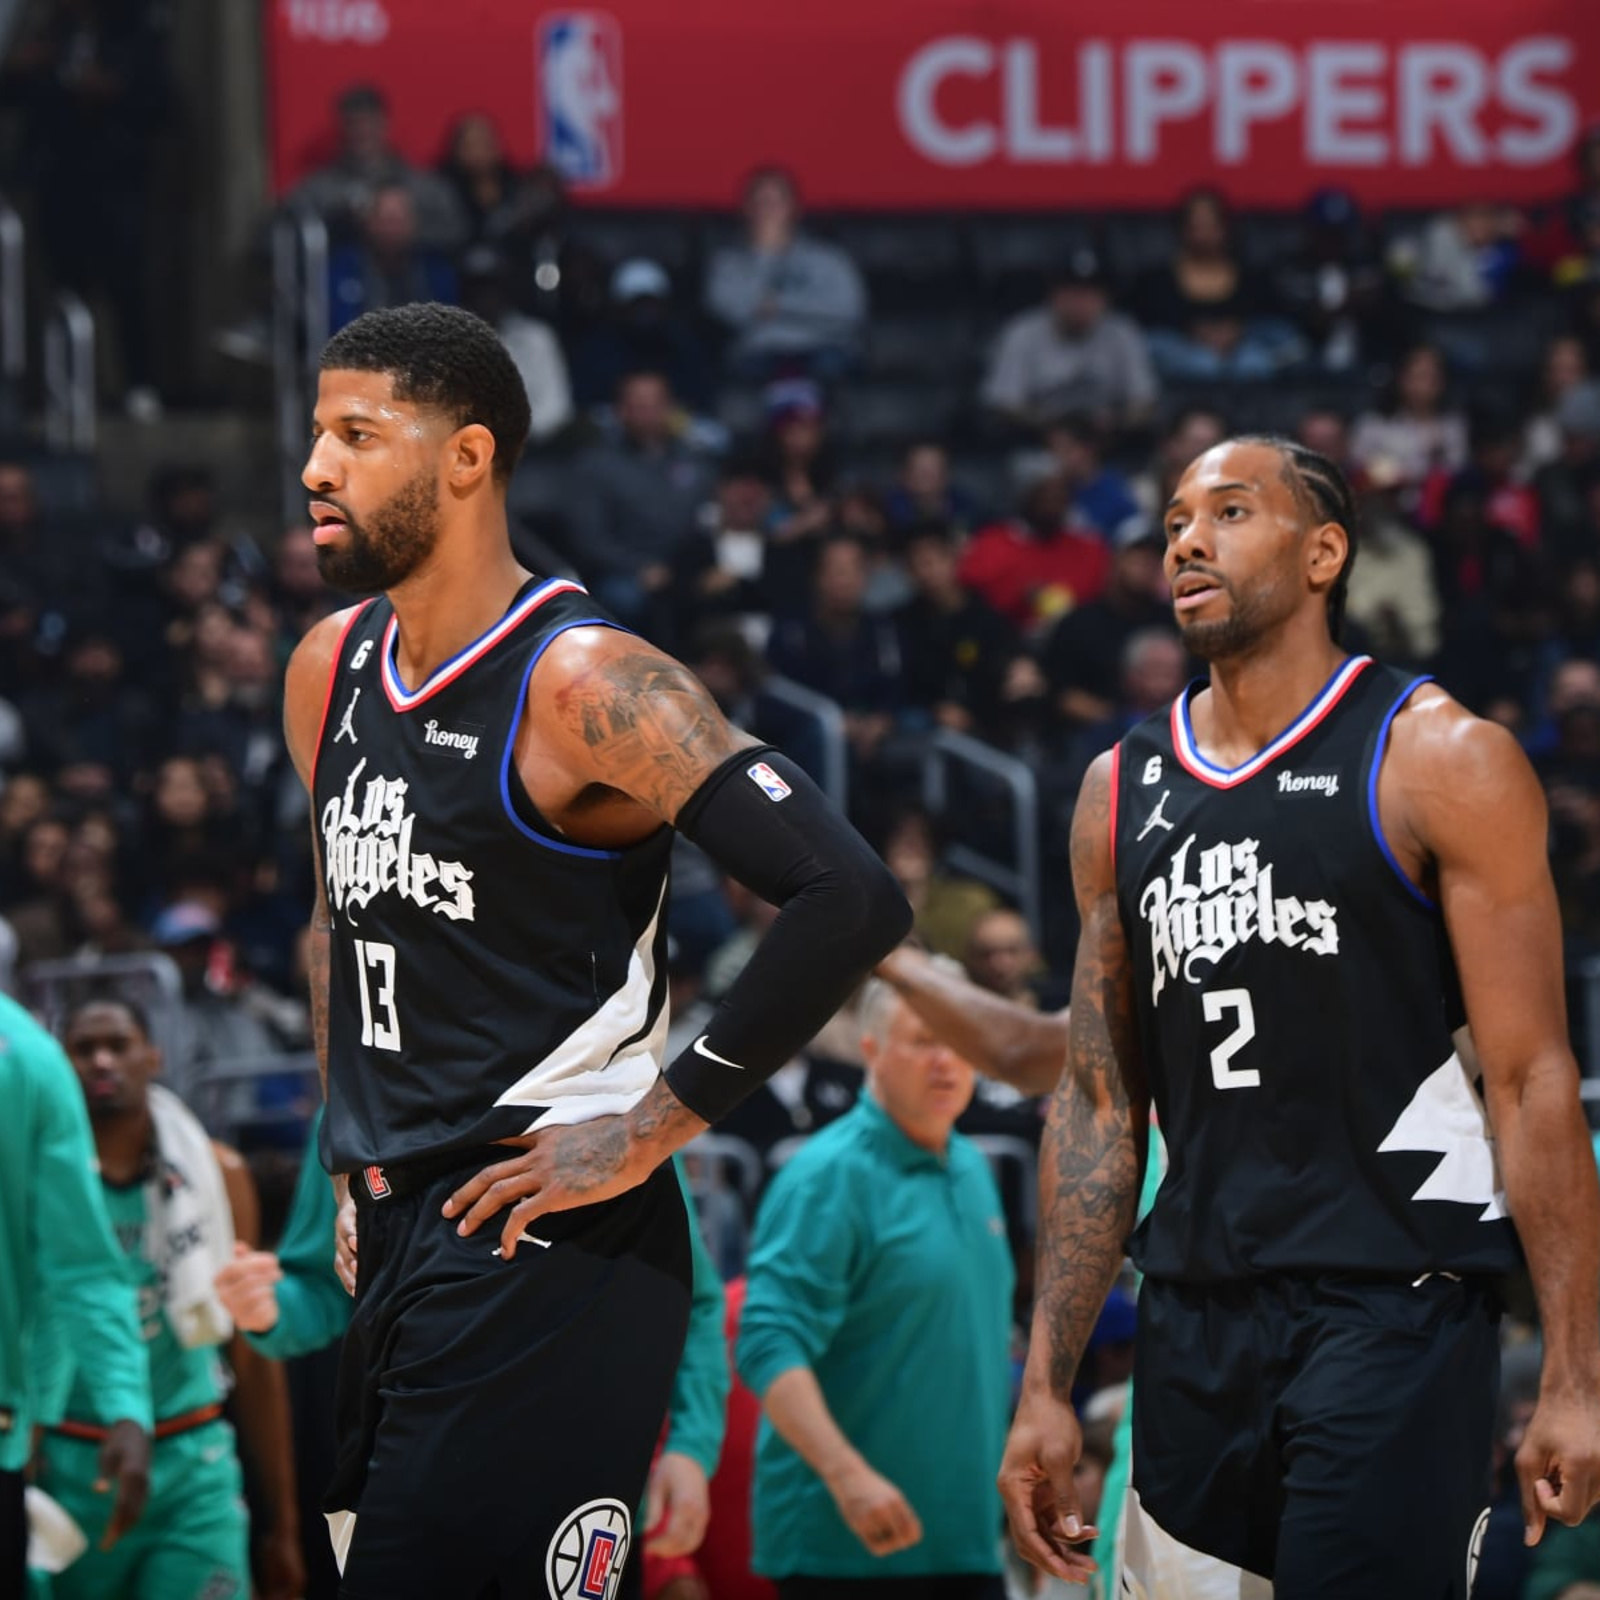 Clippers-Lakers on tap for July 30 in NBA's restart to season